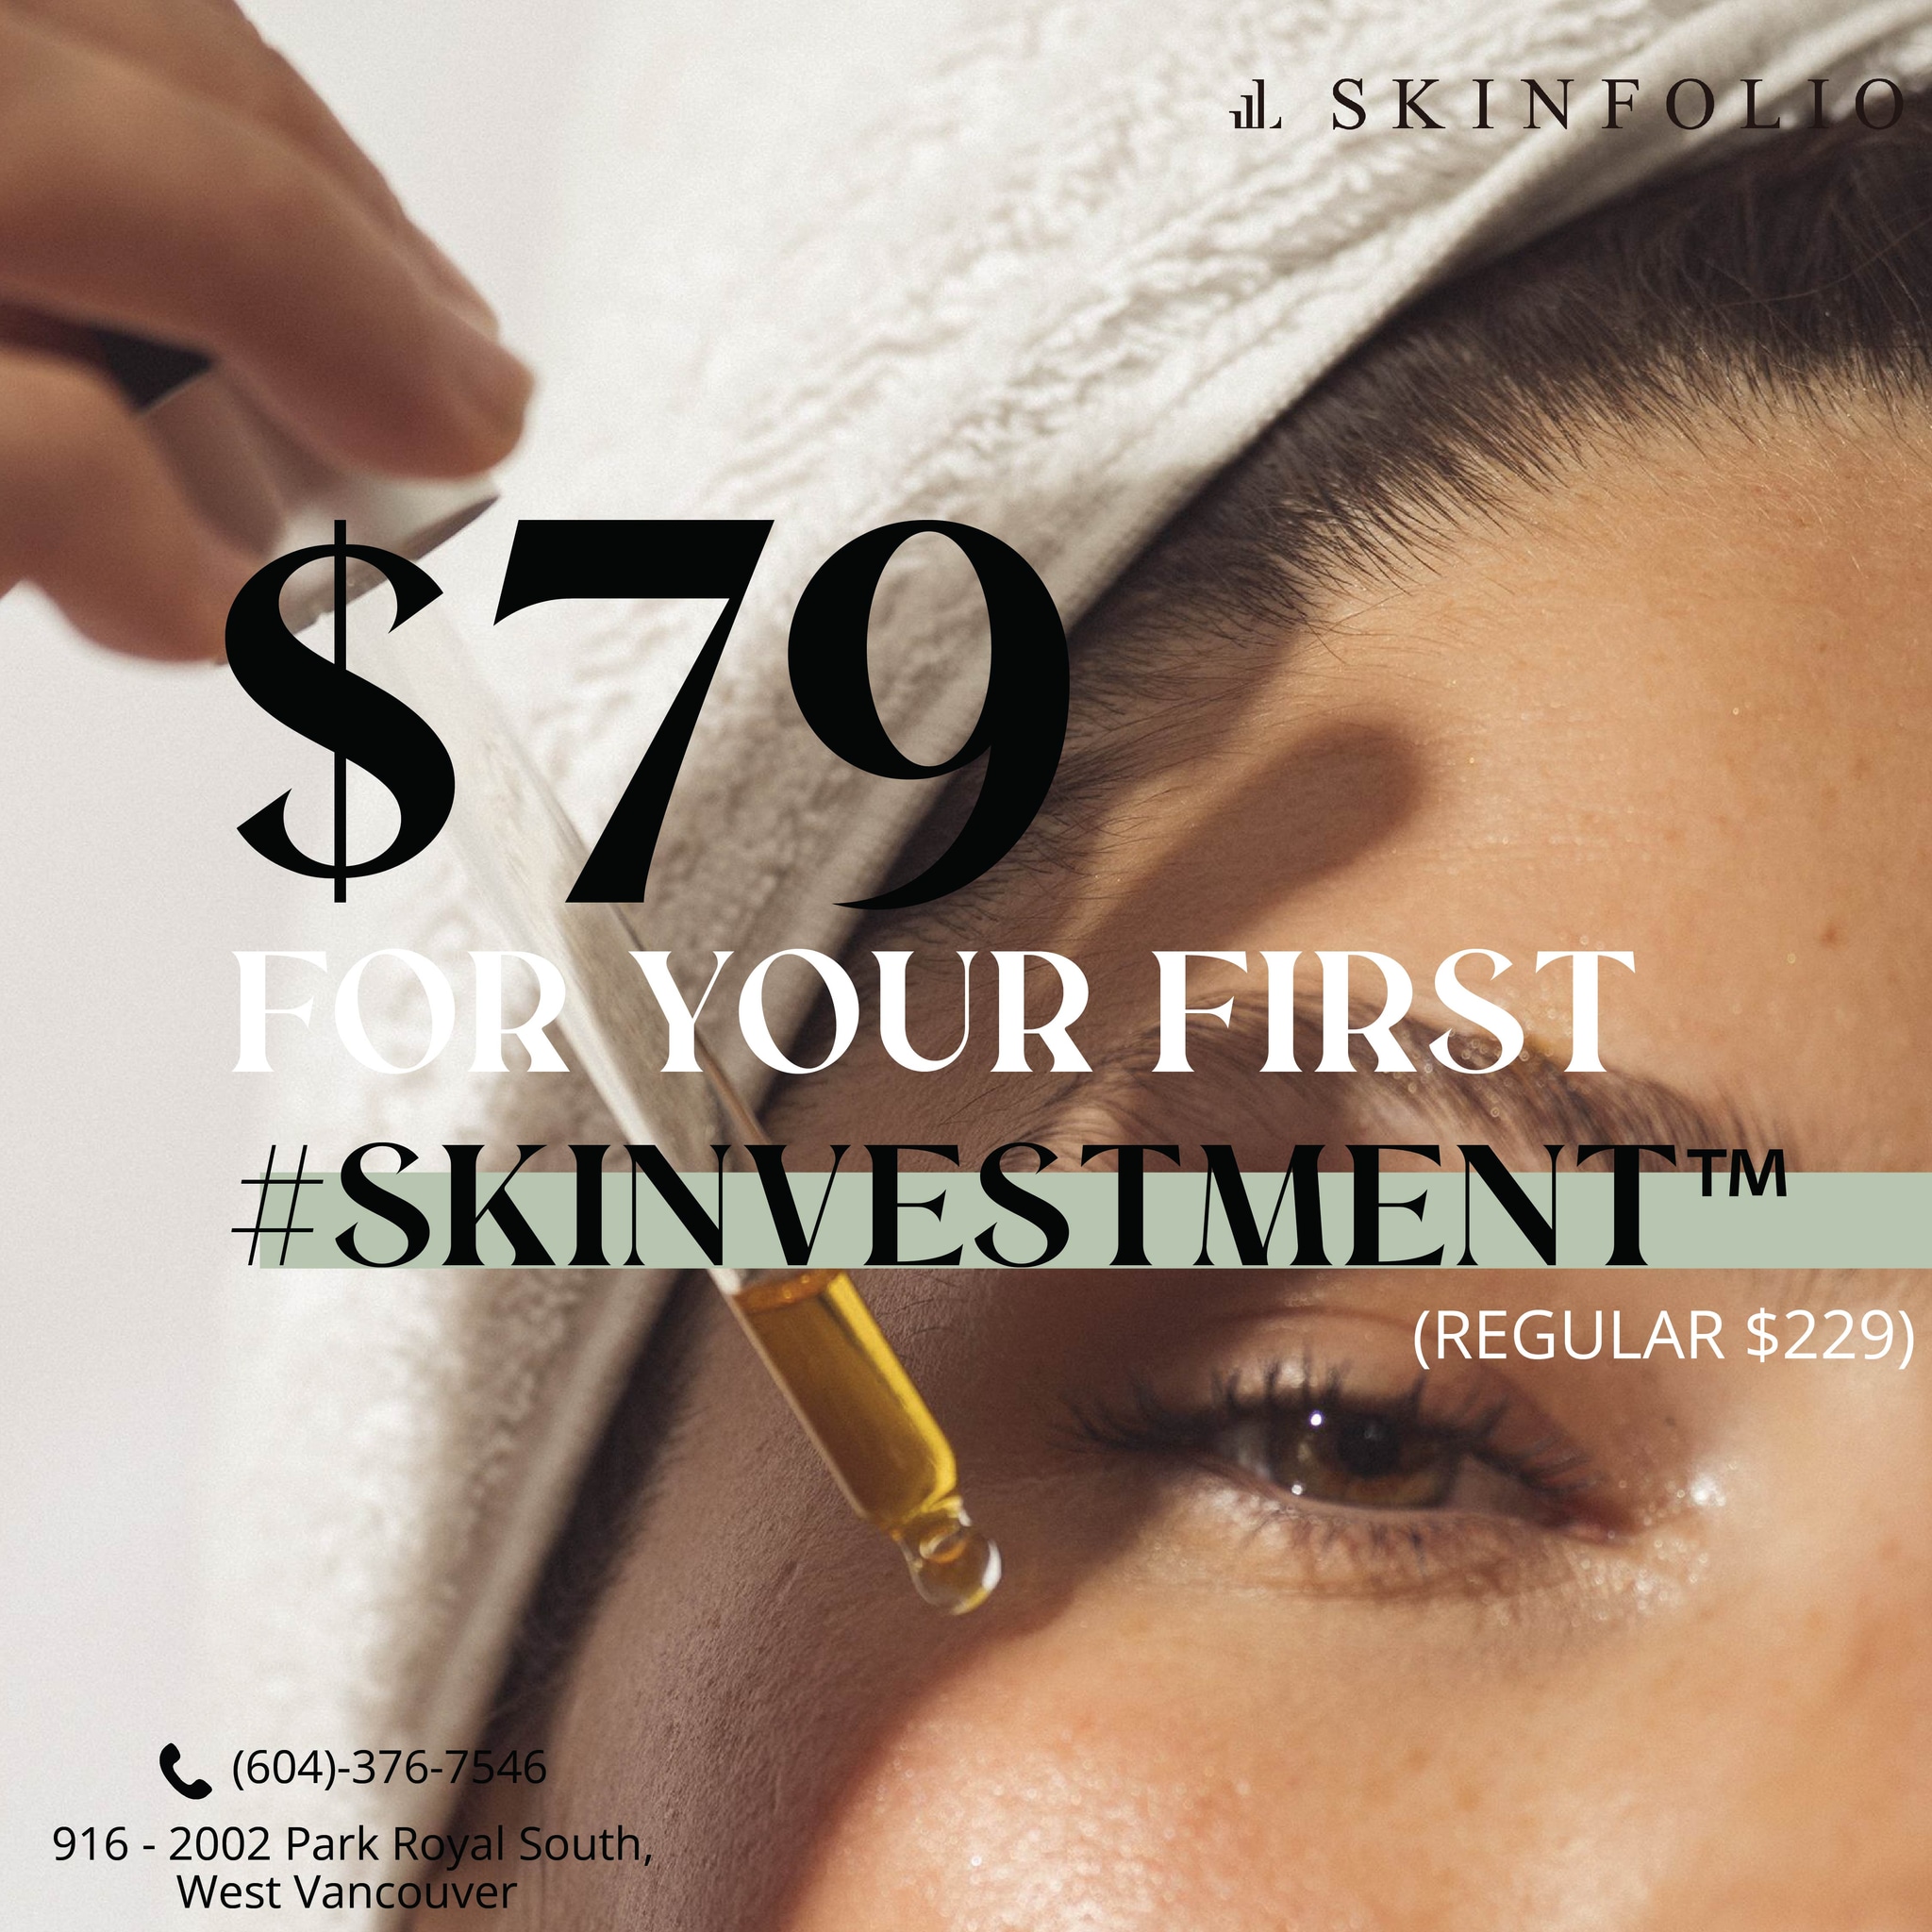 Enjoy your first SkINVESMENT for only $79+tax!